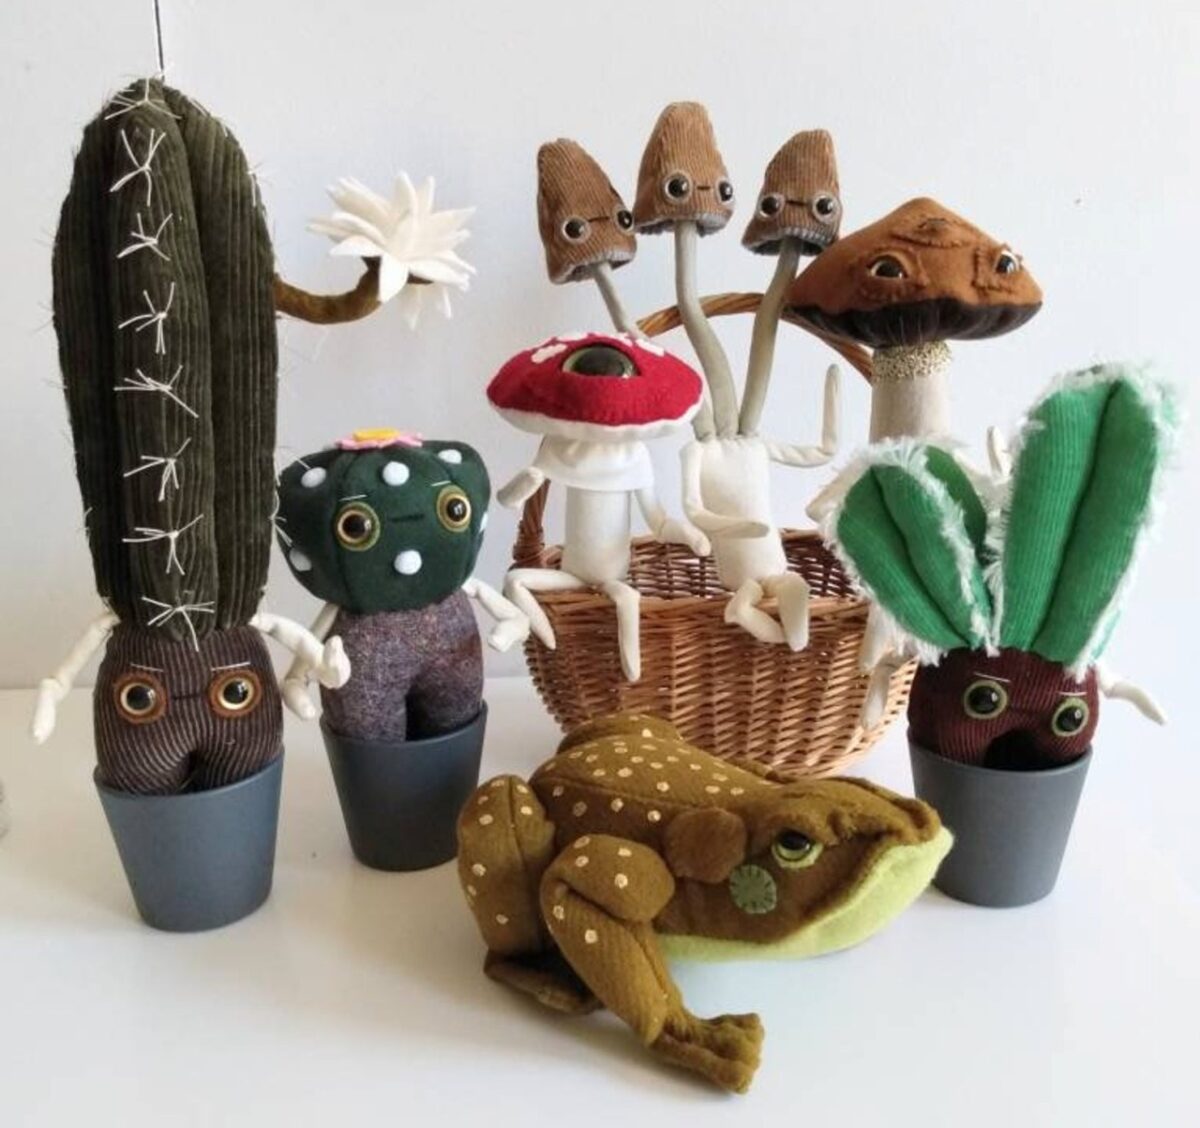 Fungus And Vegetable Textile Sculptures By Kami Goertz 6